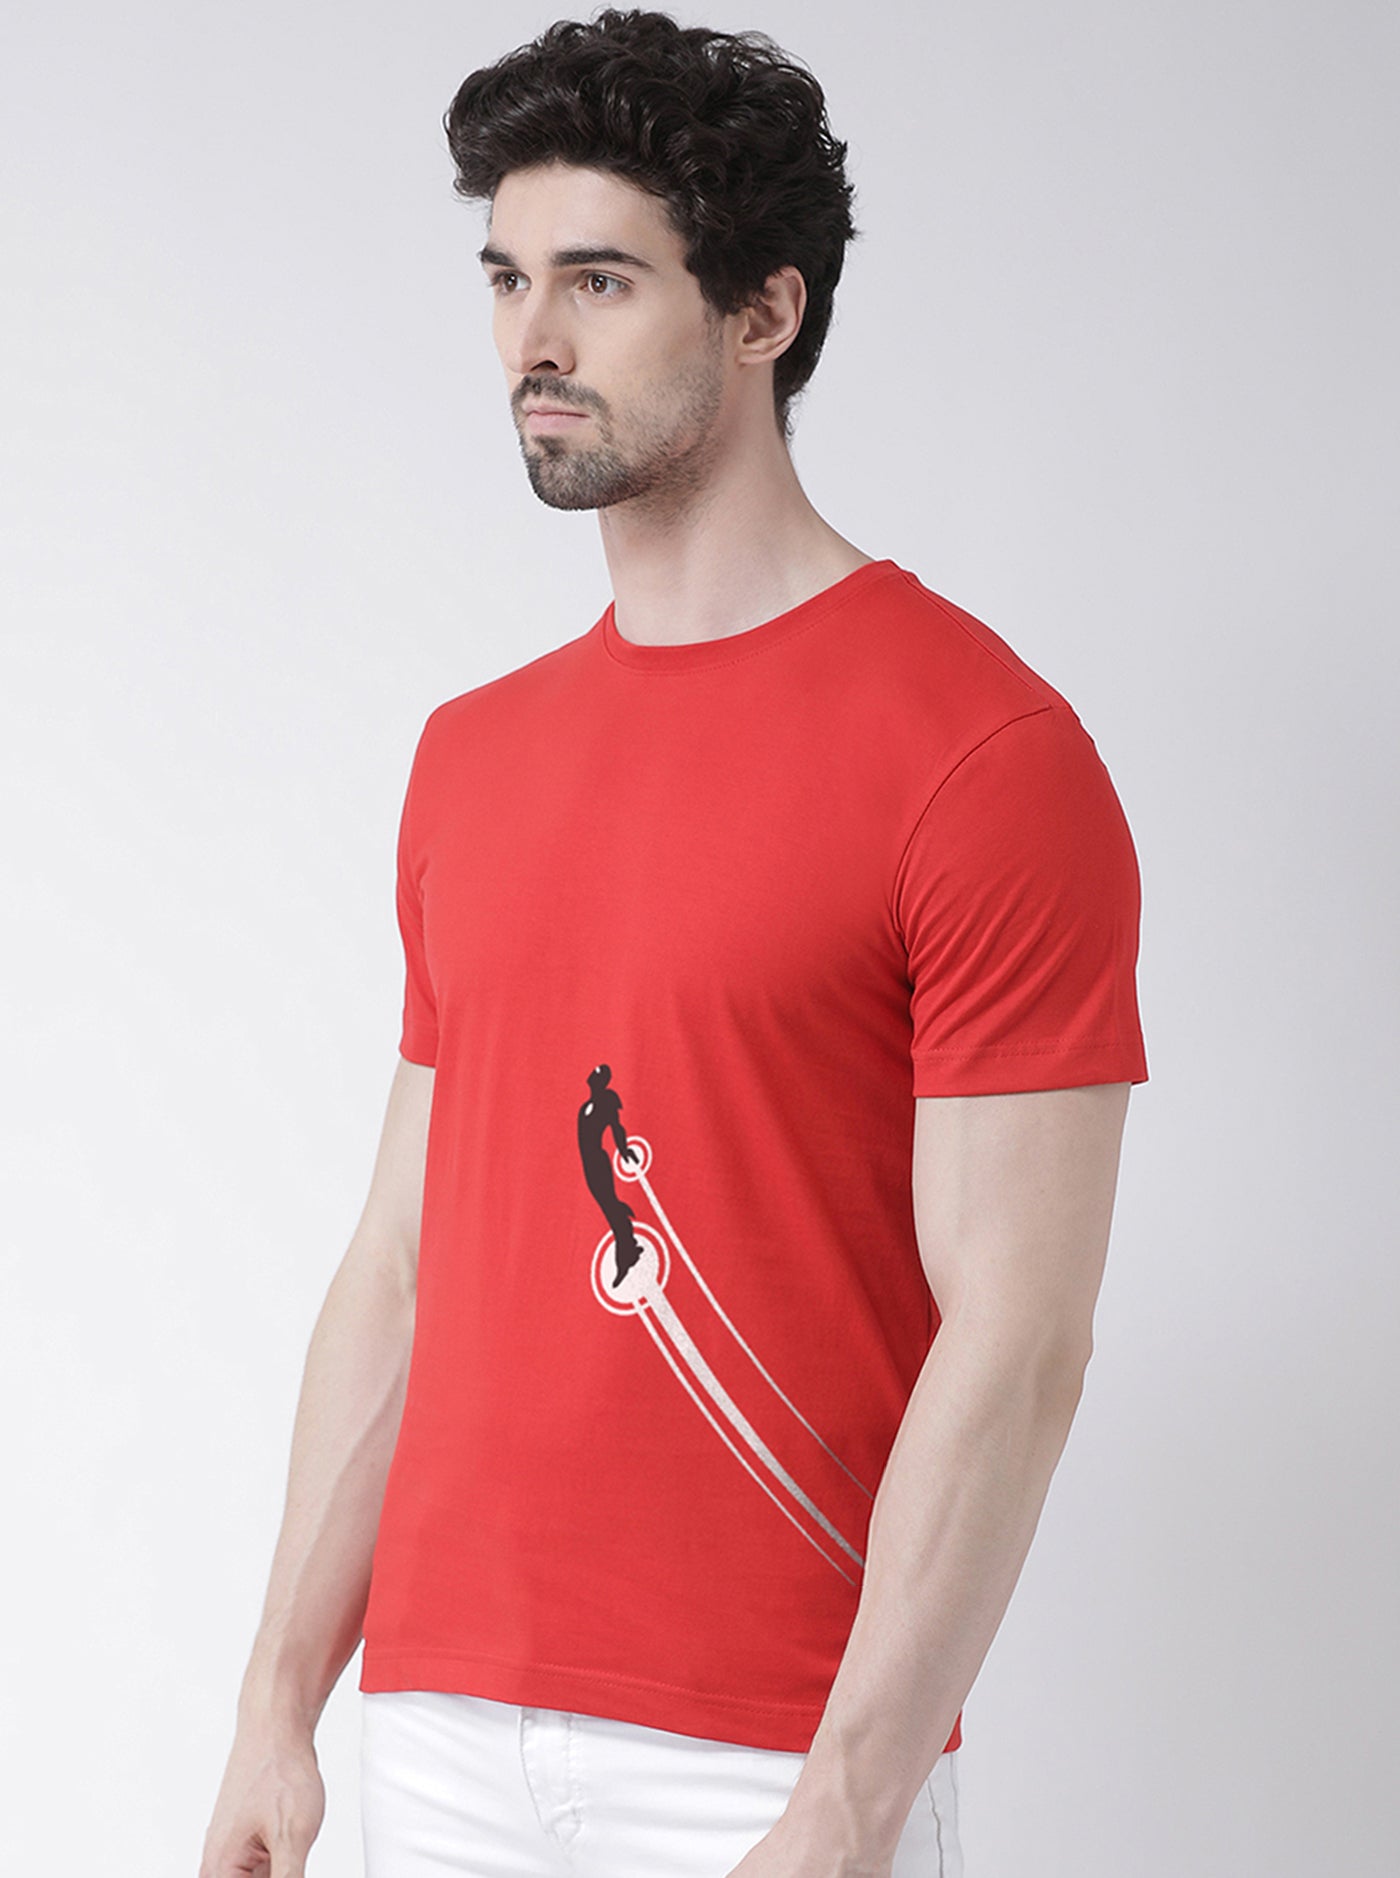 Iron Man Printed Round Neck T-Shirt - Friskers